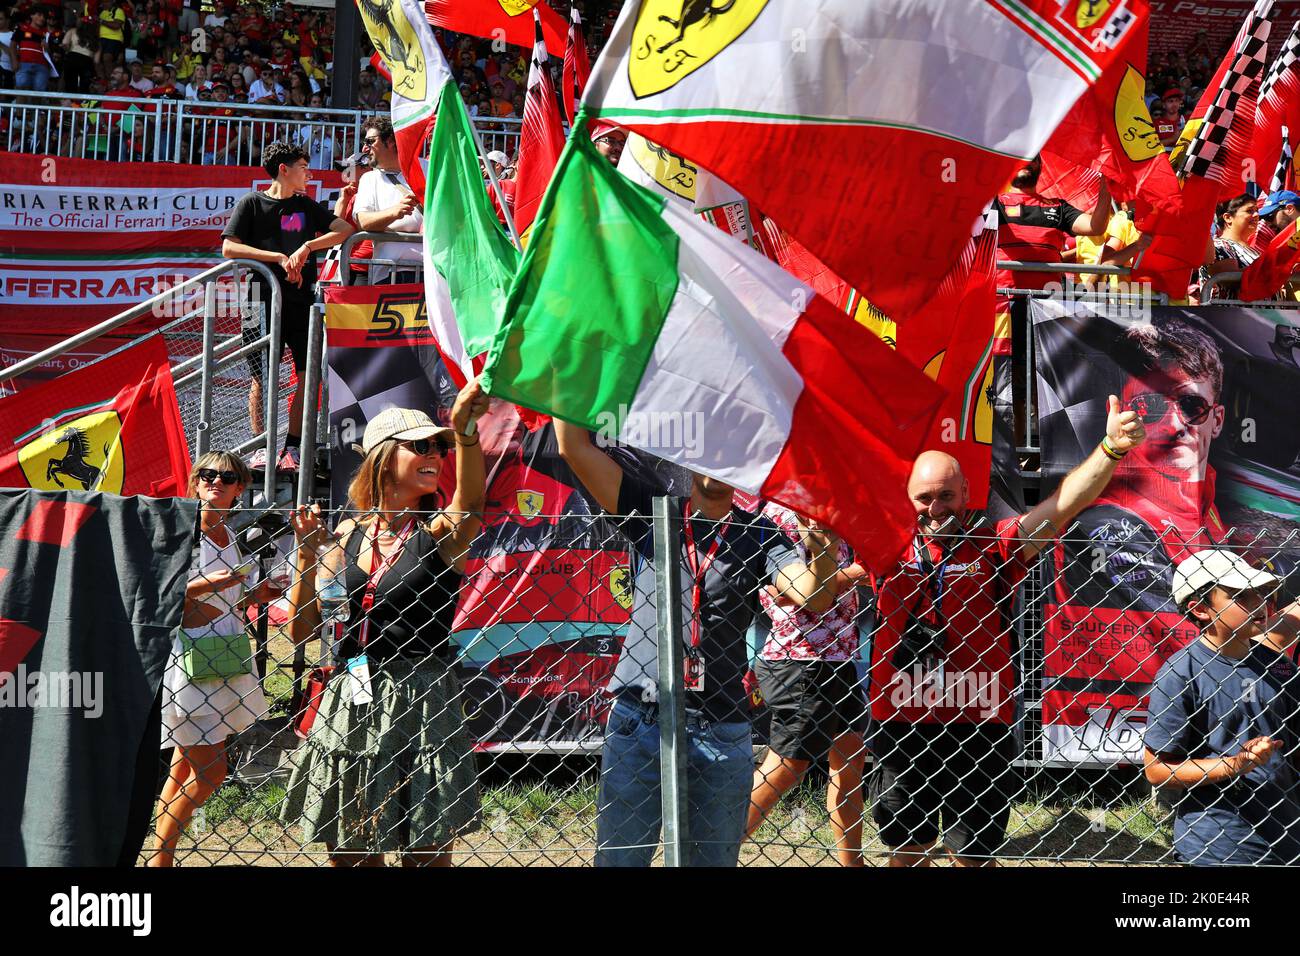 Monza, Italy. 11th Sep, 2022. Circuit atmosphere - Ferrari fans in the grandstand. Italian Grand Prix, Sunday 11th September 2022. Monza Italy. Credit: James Moy/Alamy Live News Credit: James Moy/Alamy Live News Stock Photo